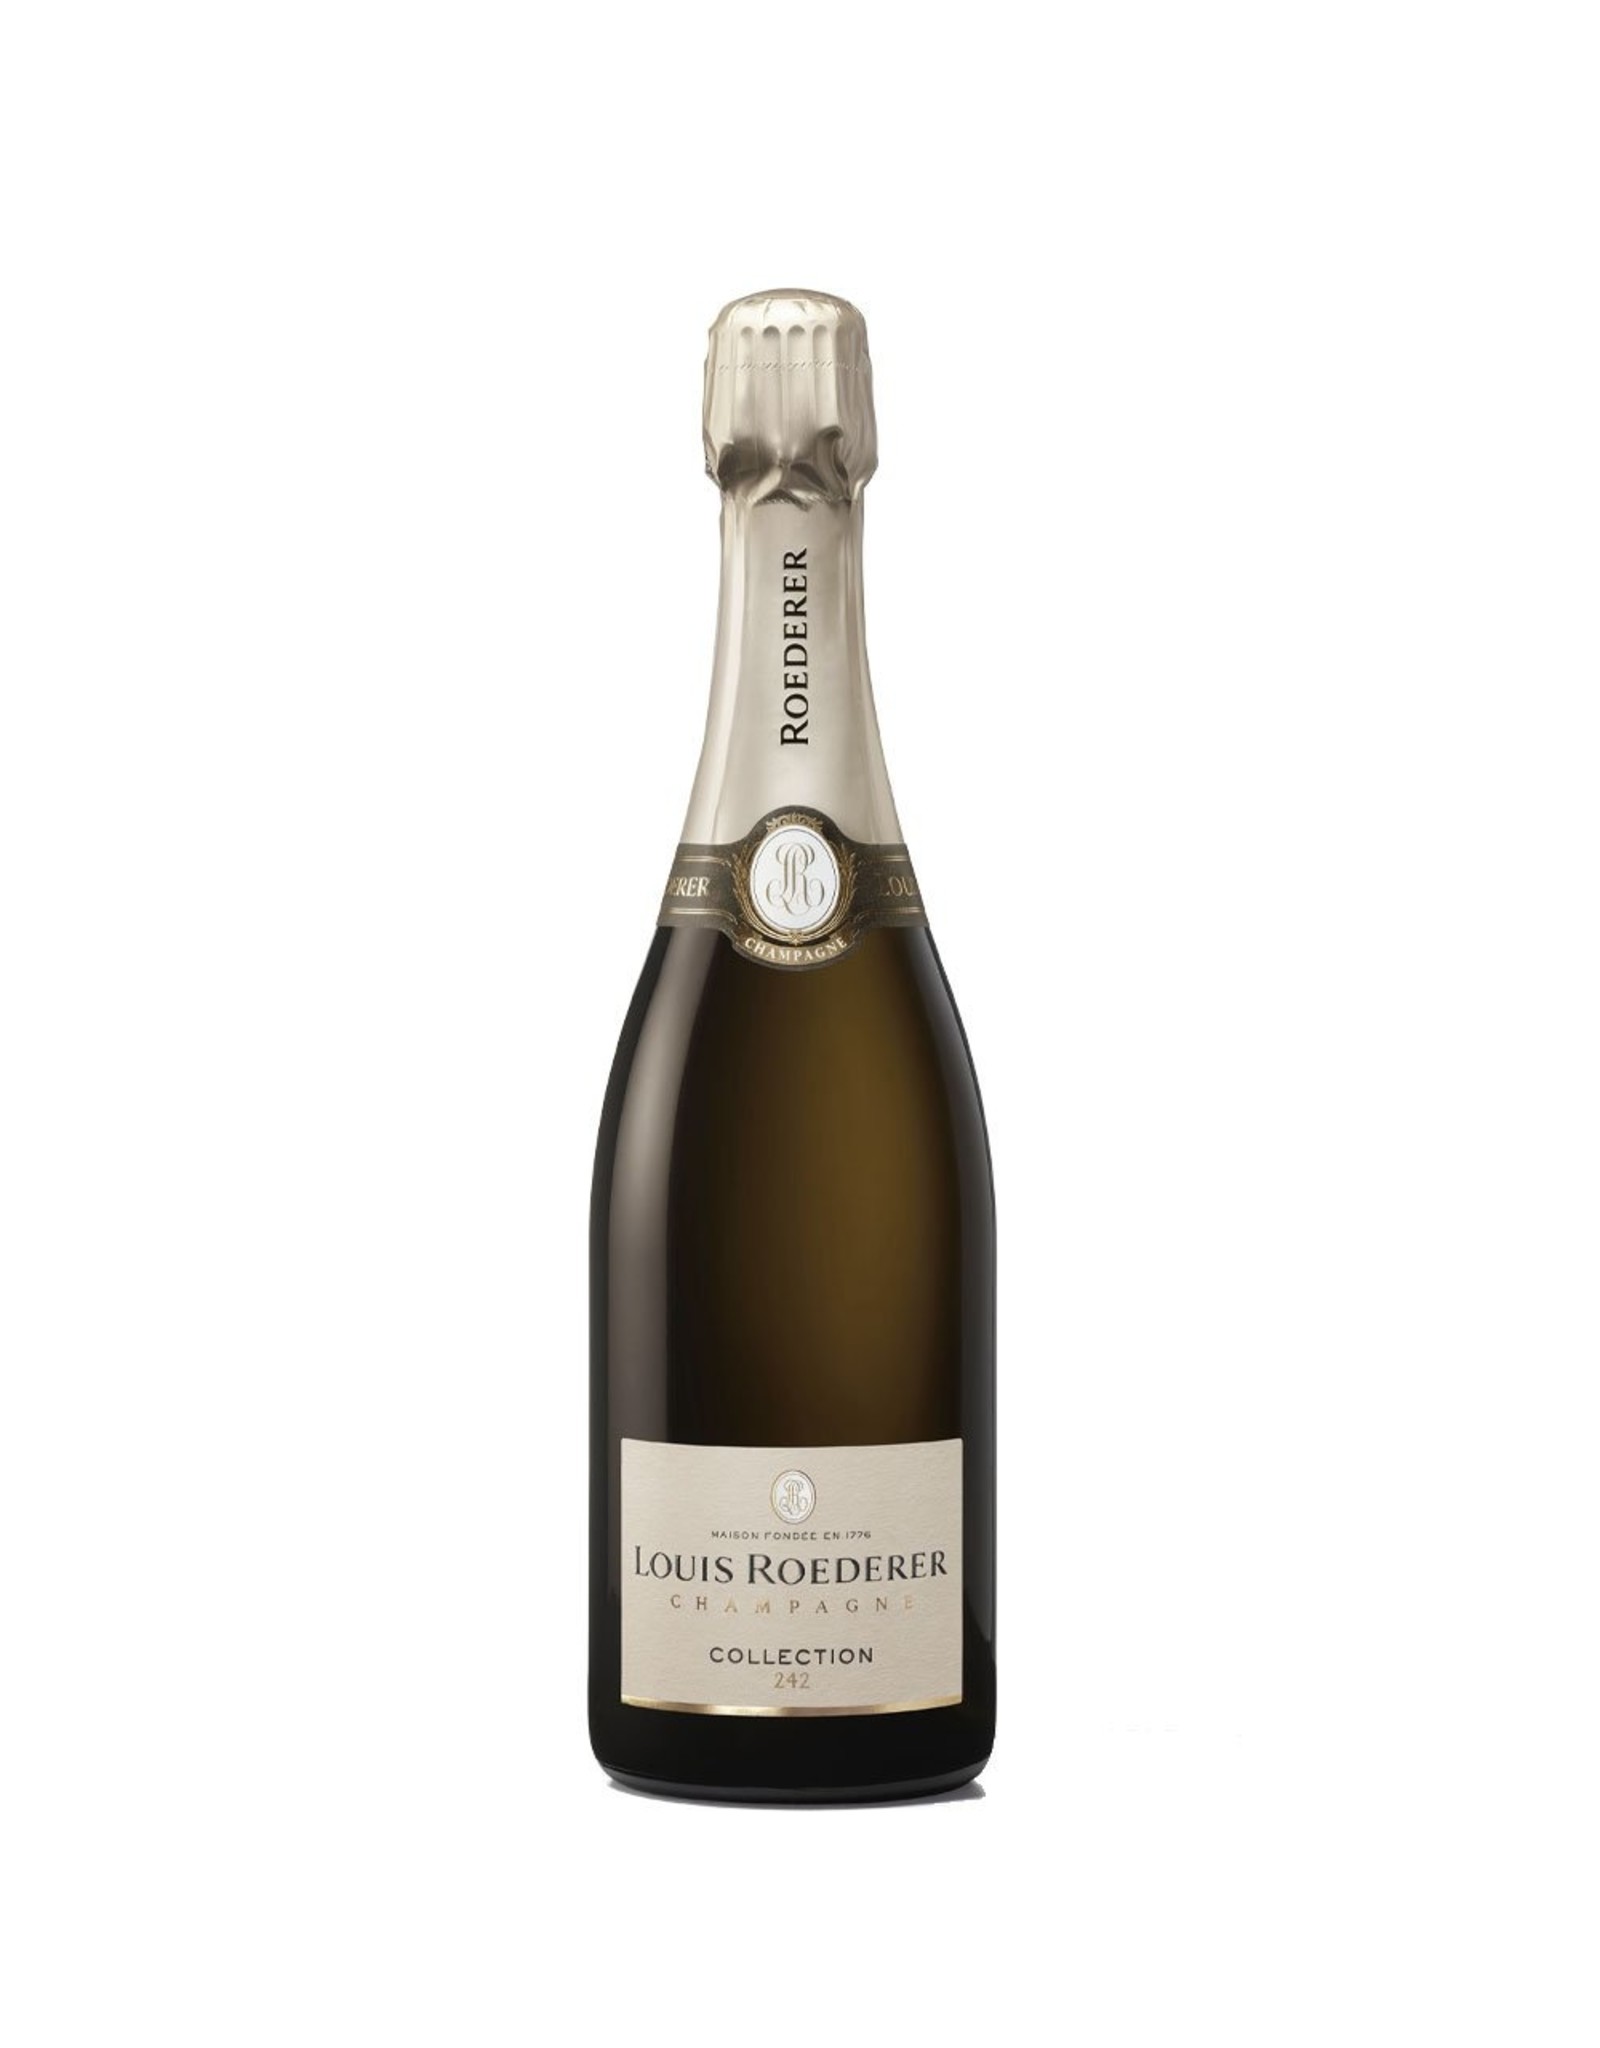 Roederer Collection 242 Brut Champagne